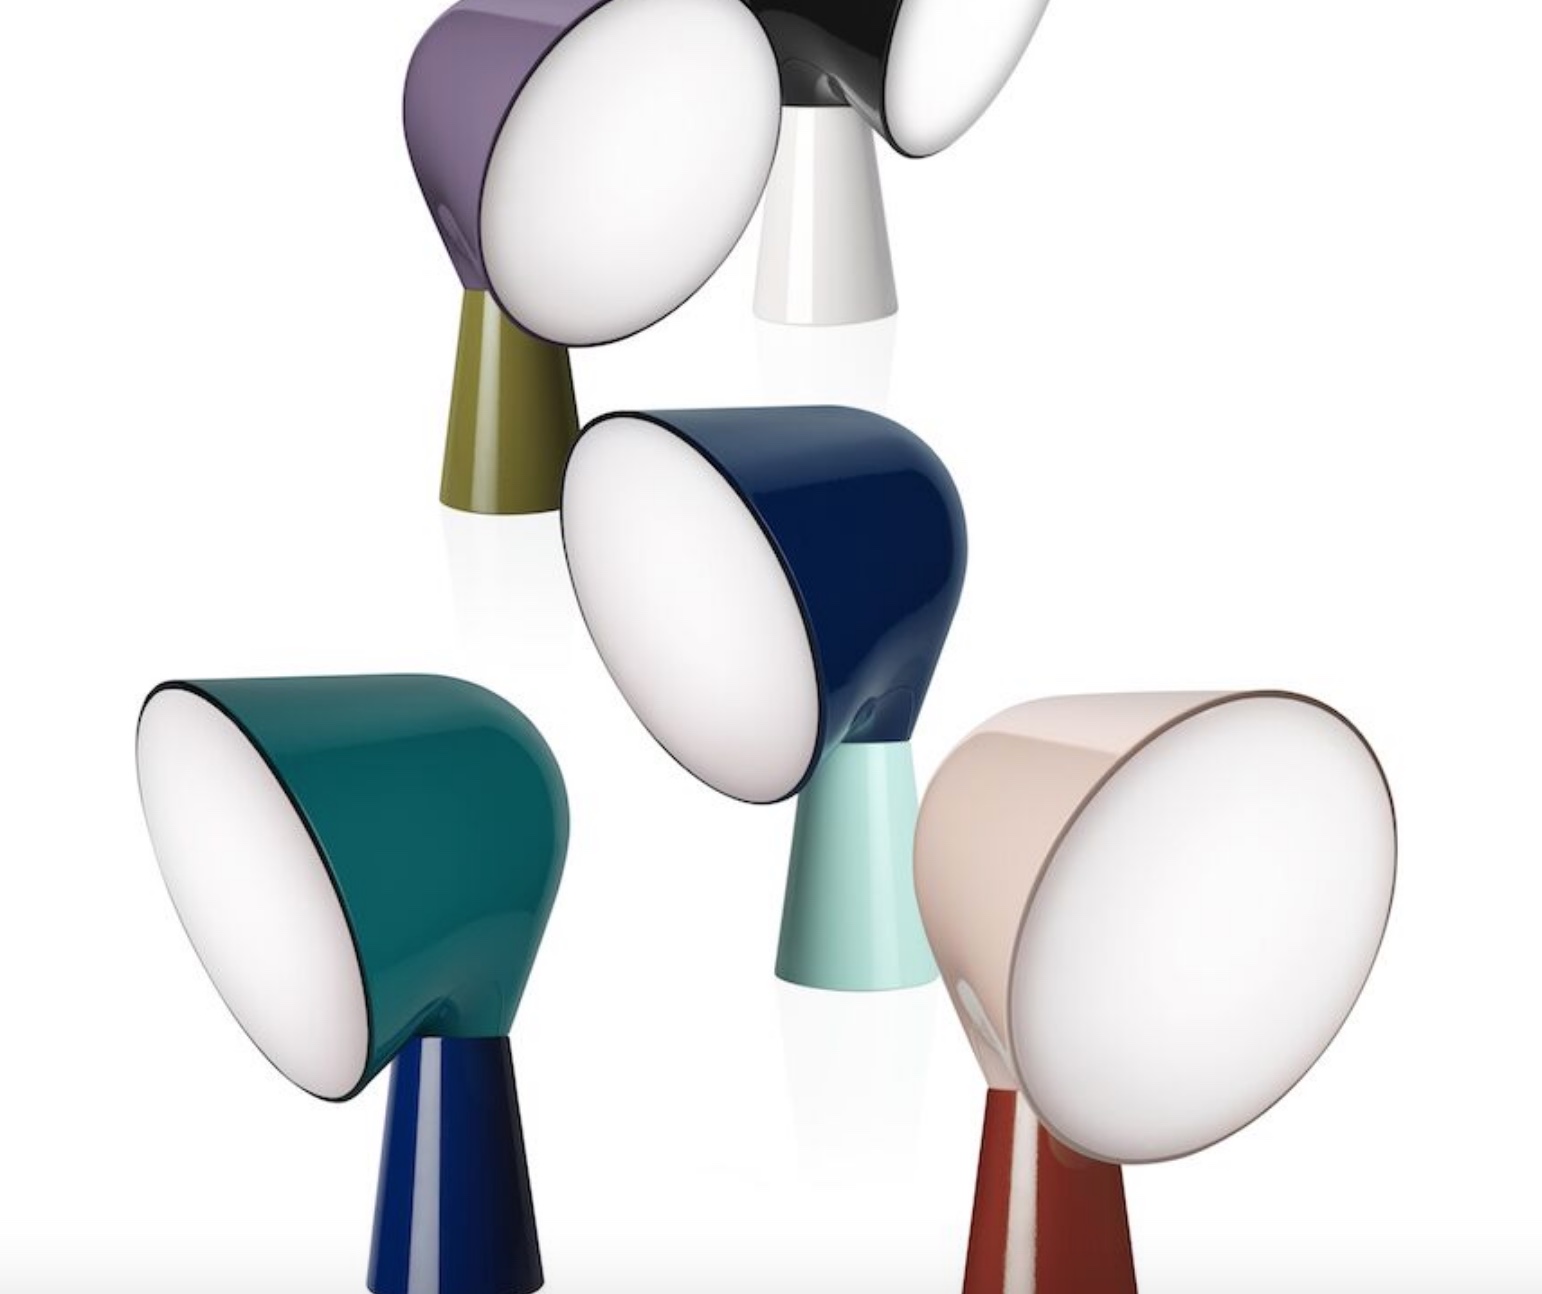 Foscarini Be/Colour collection four Binic lights in various colors